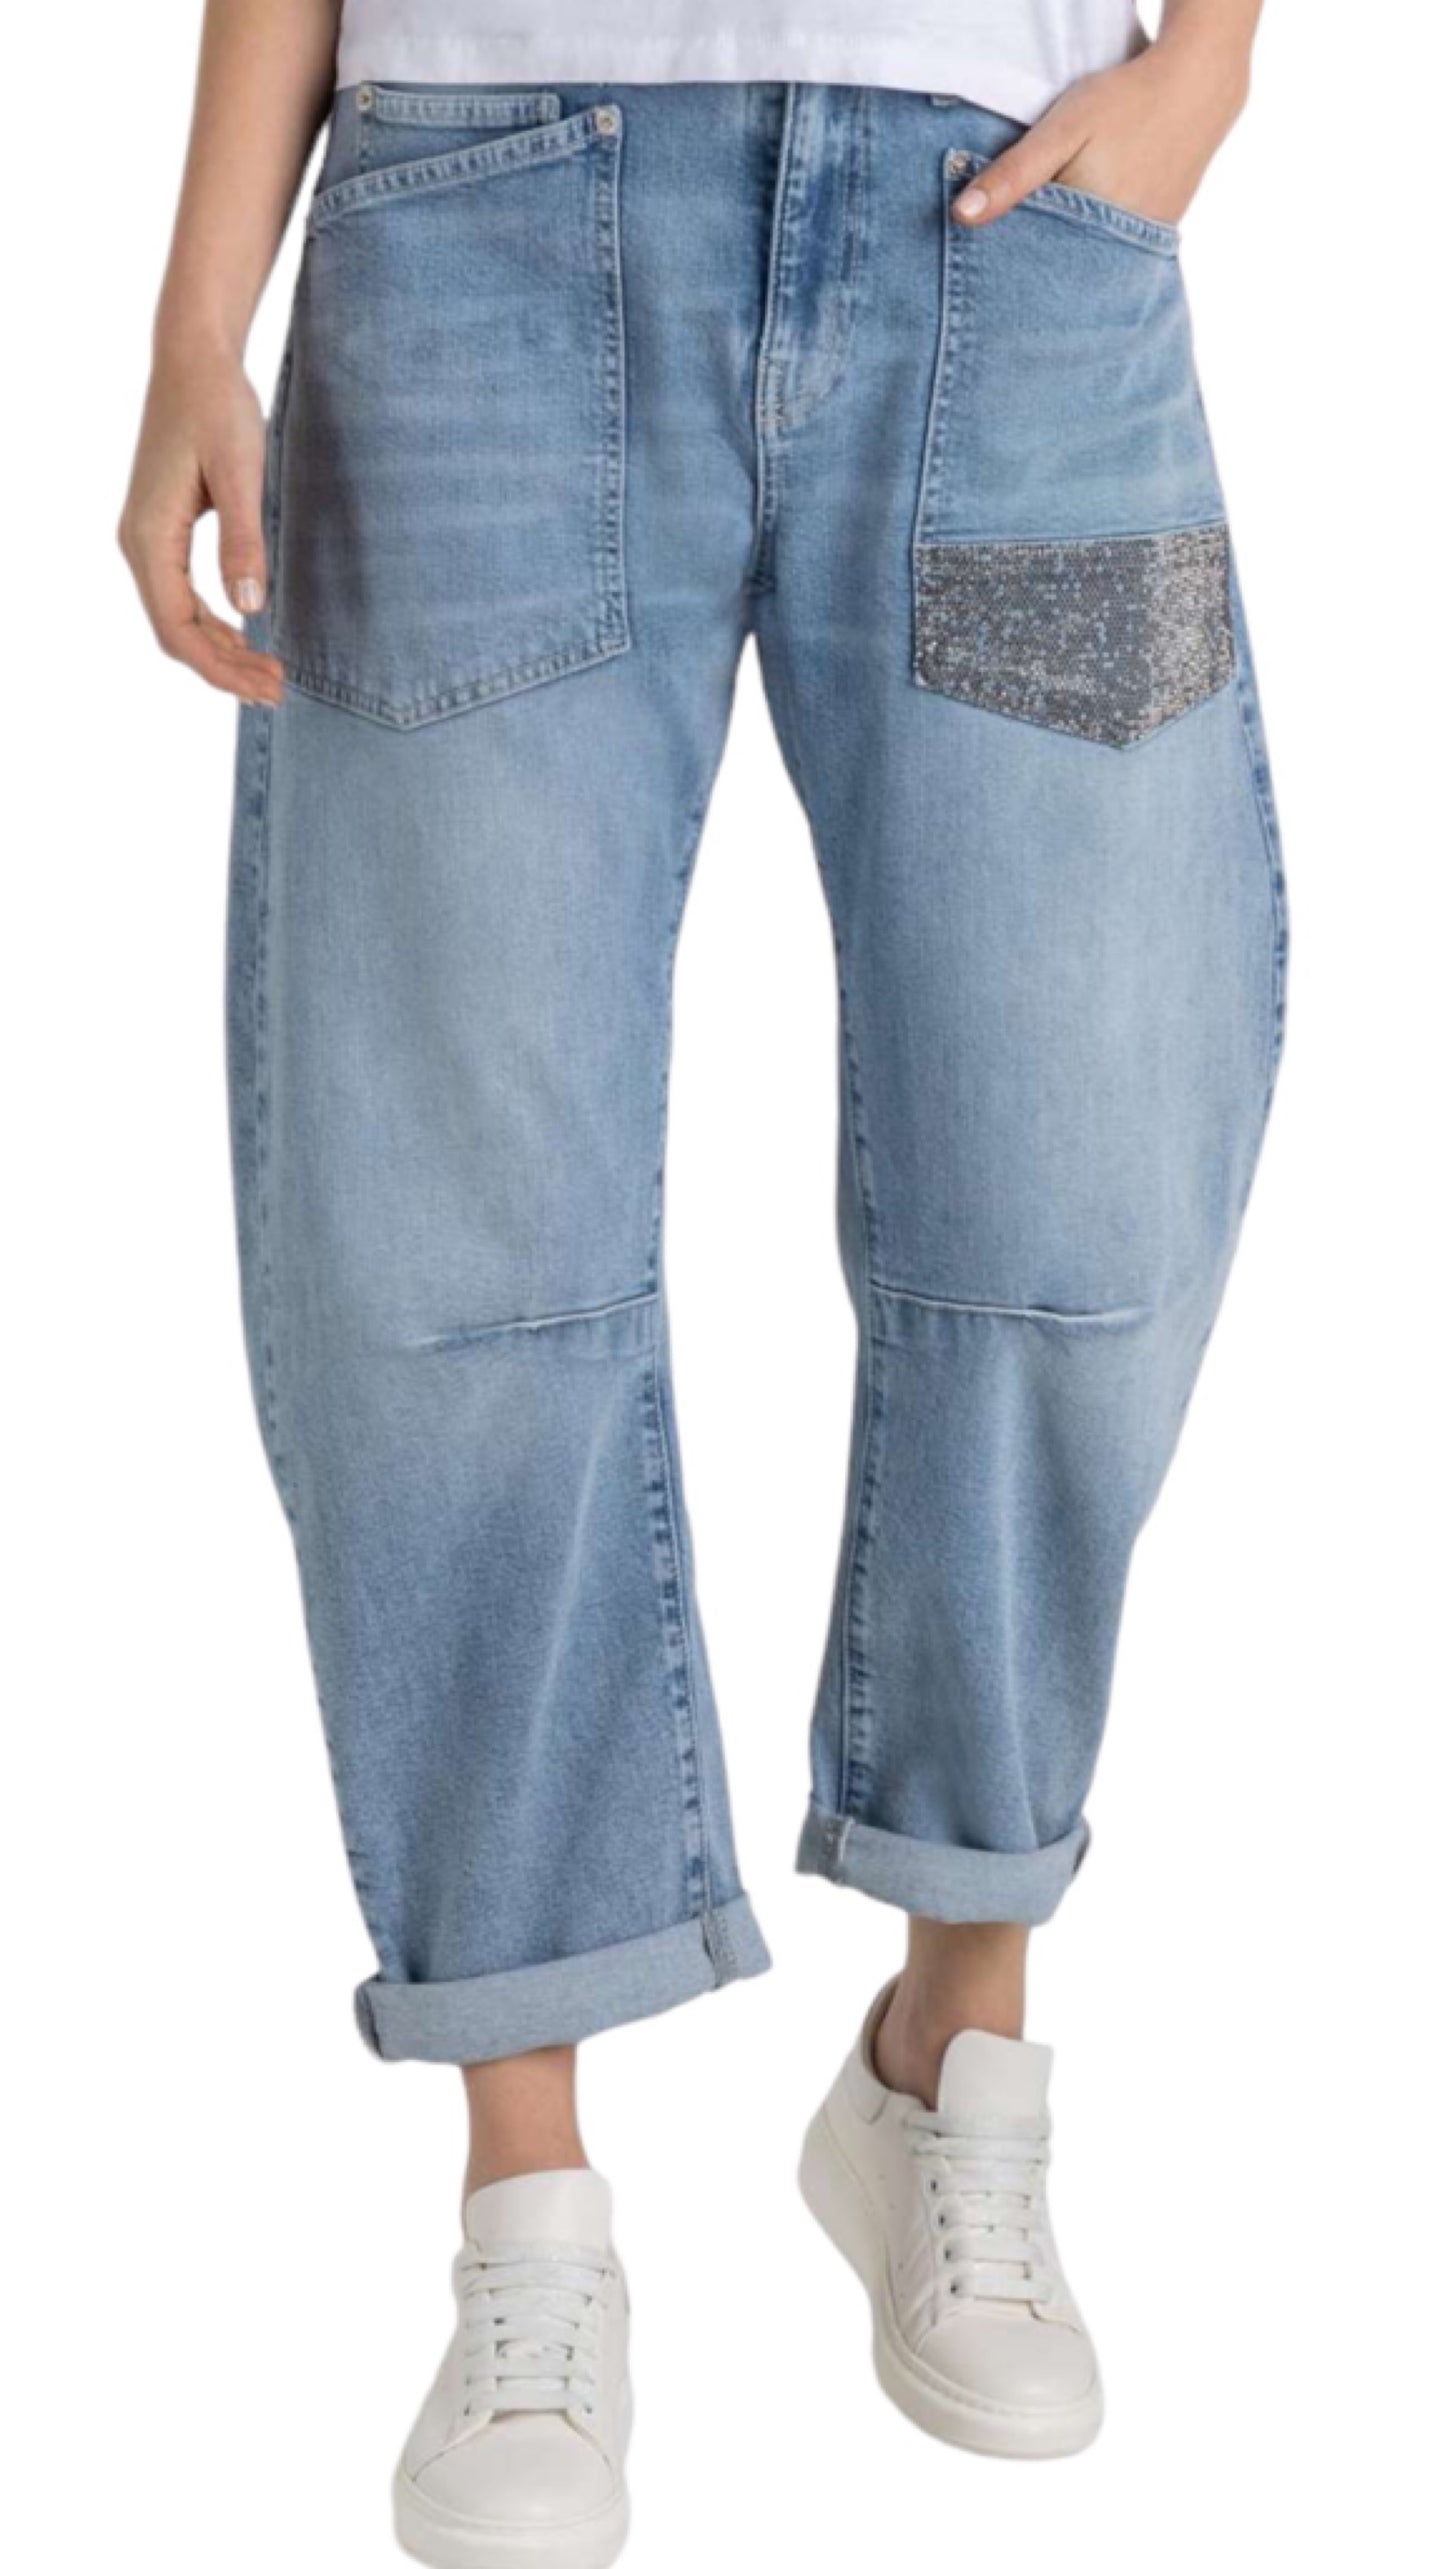 Baggy cargo glam jeans